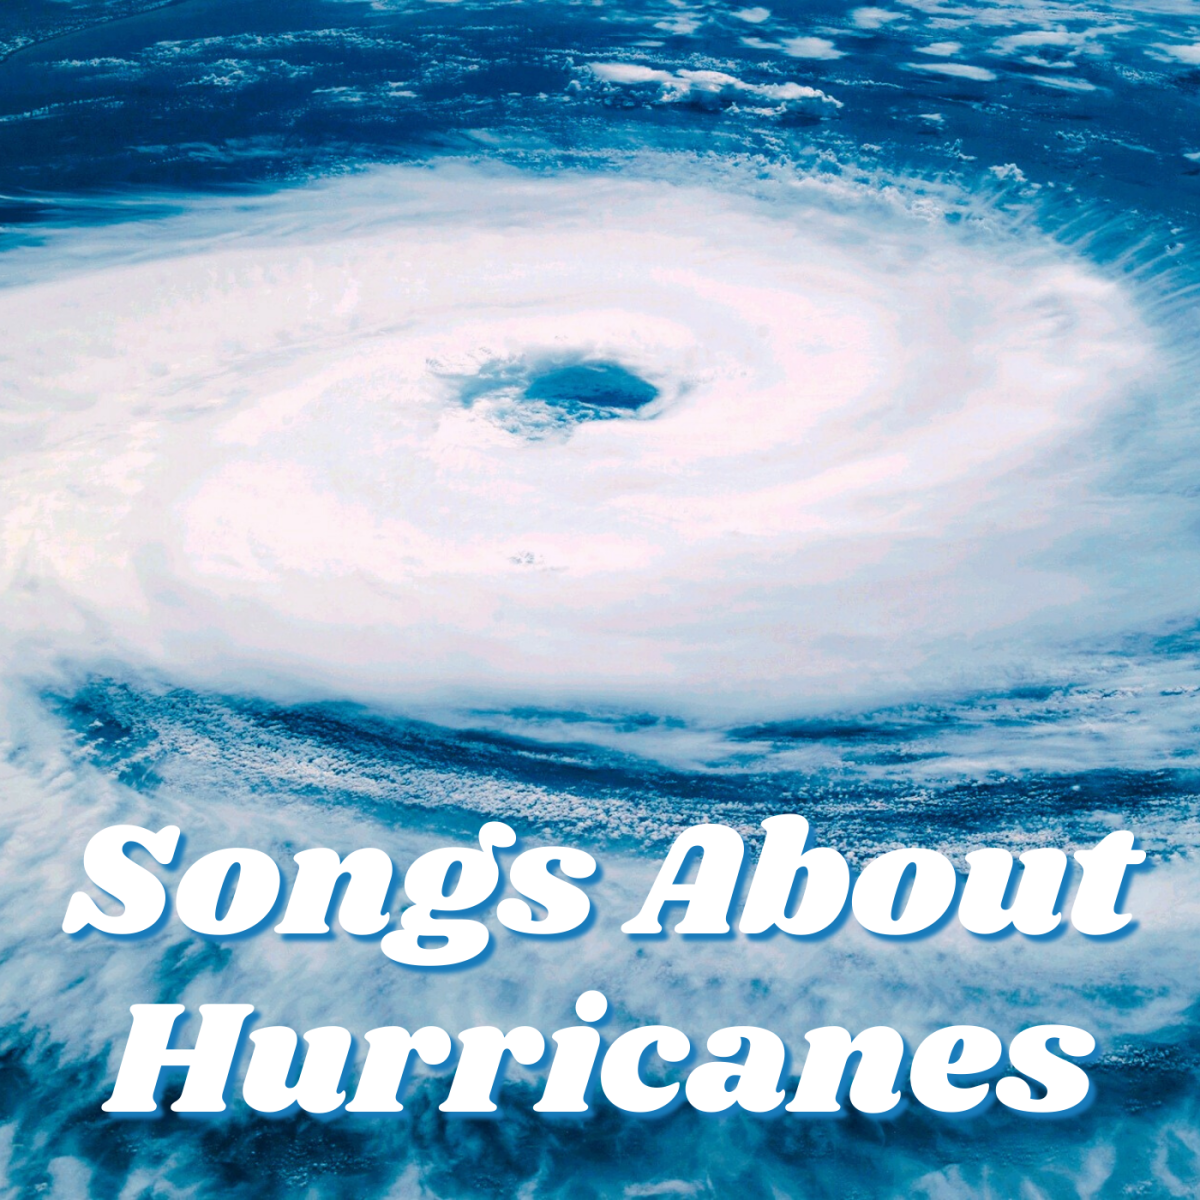 45 Songs About Hurricanes